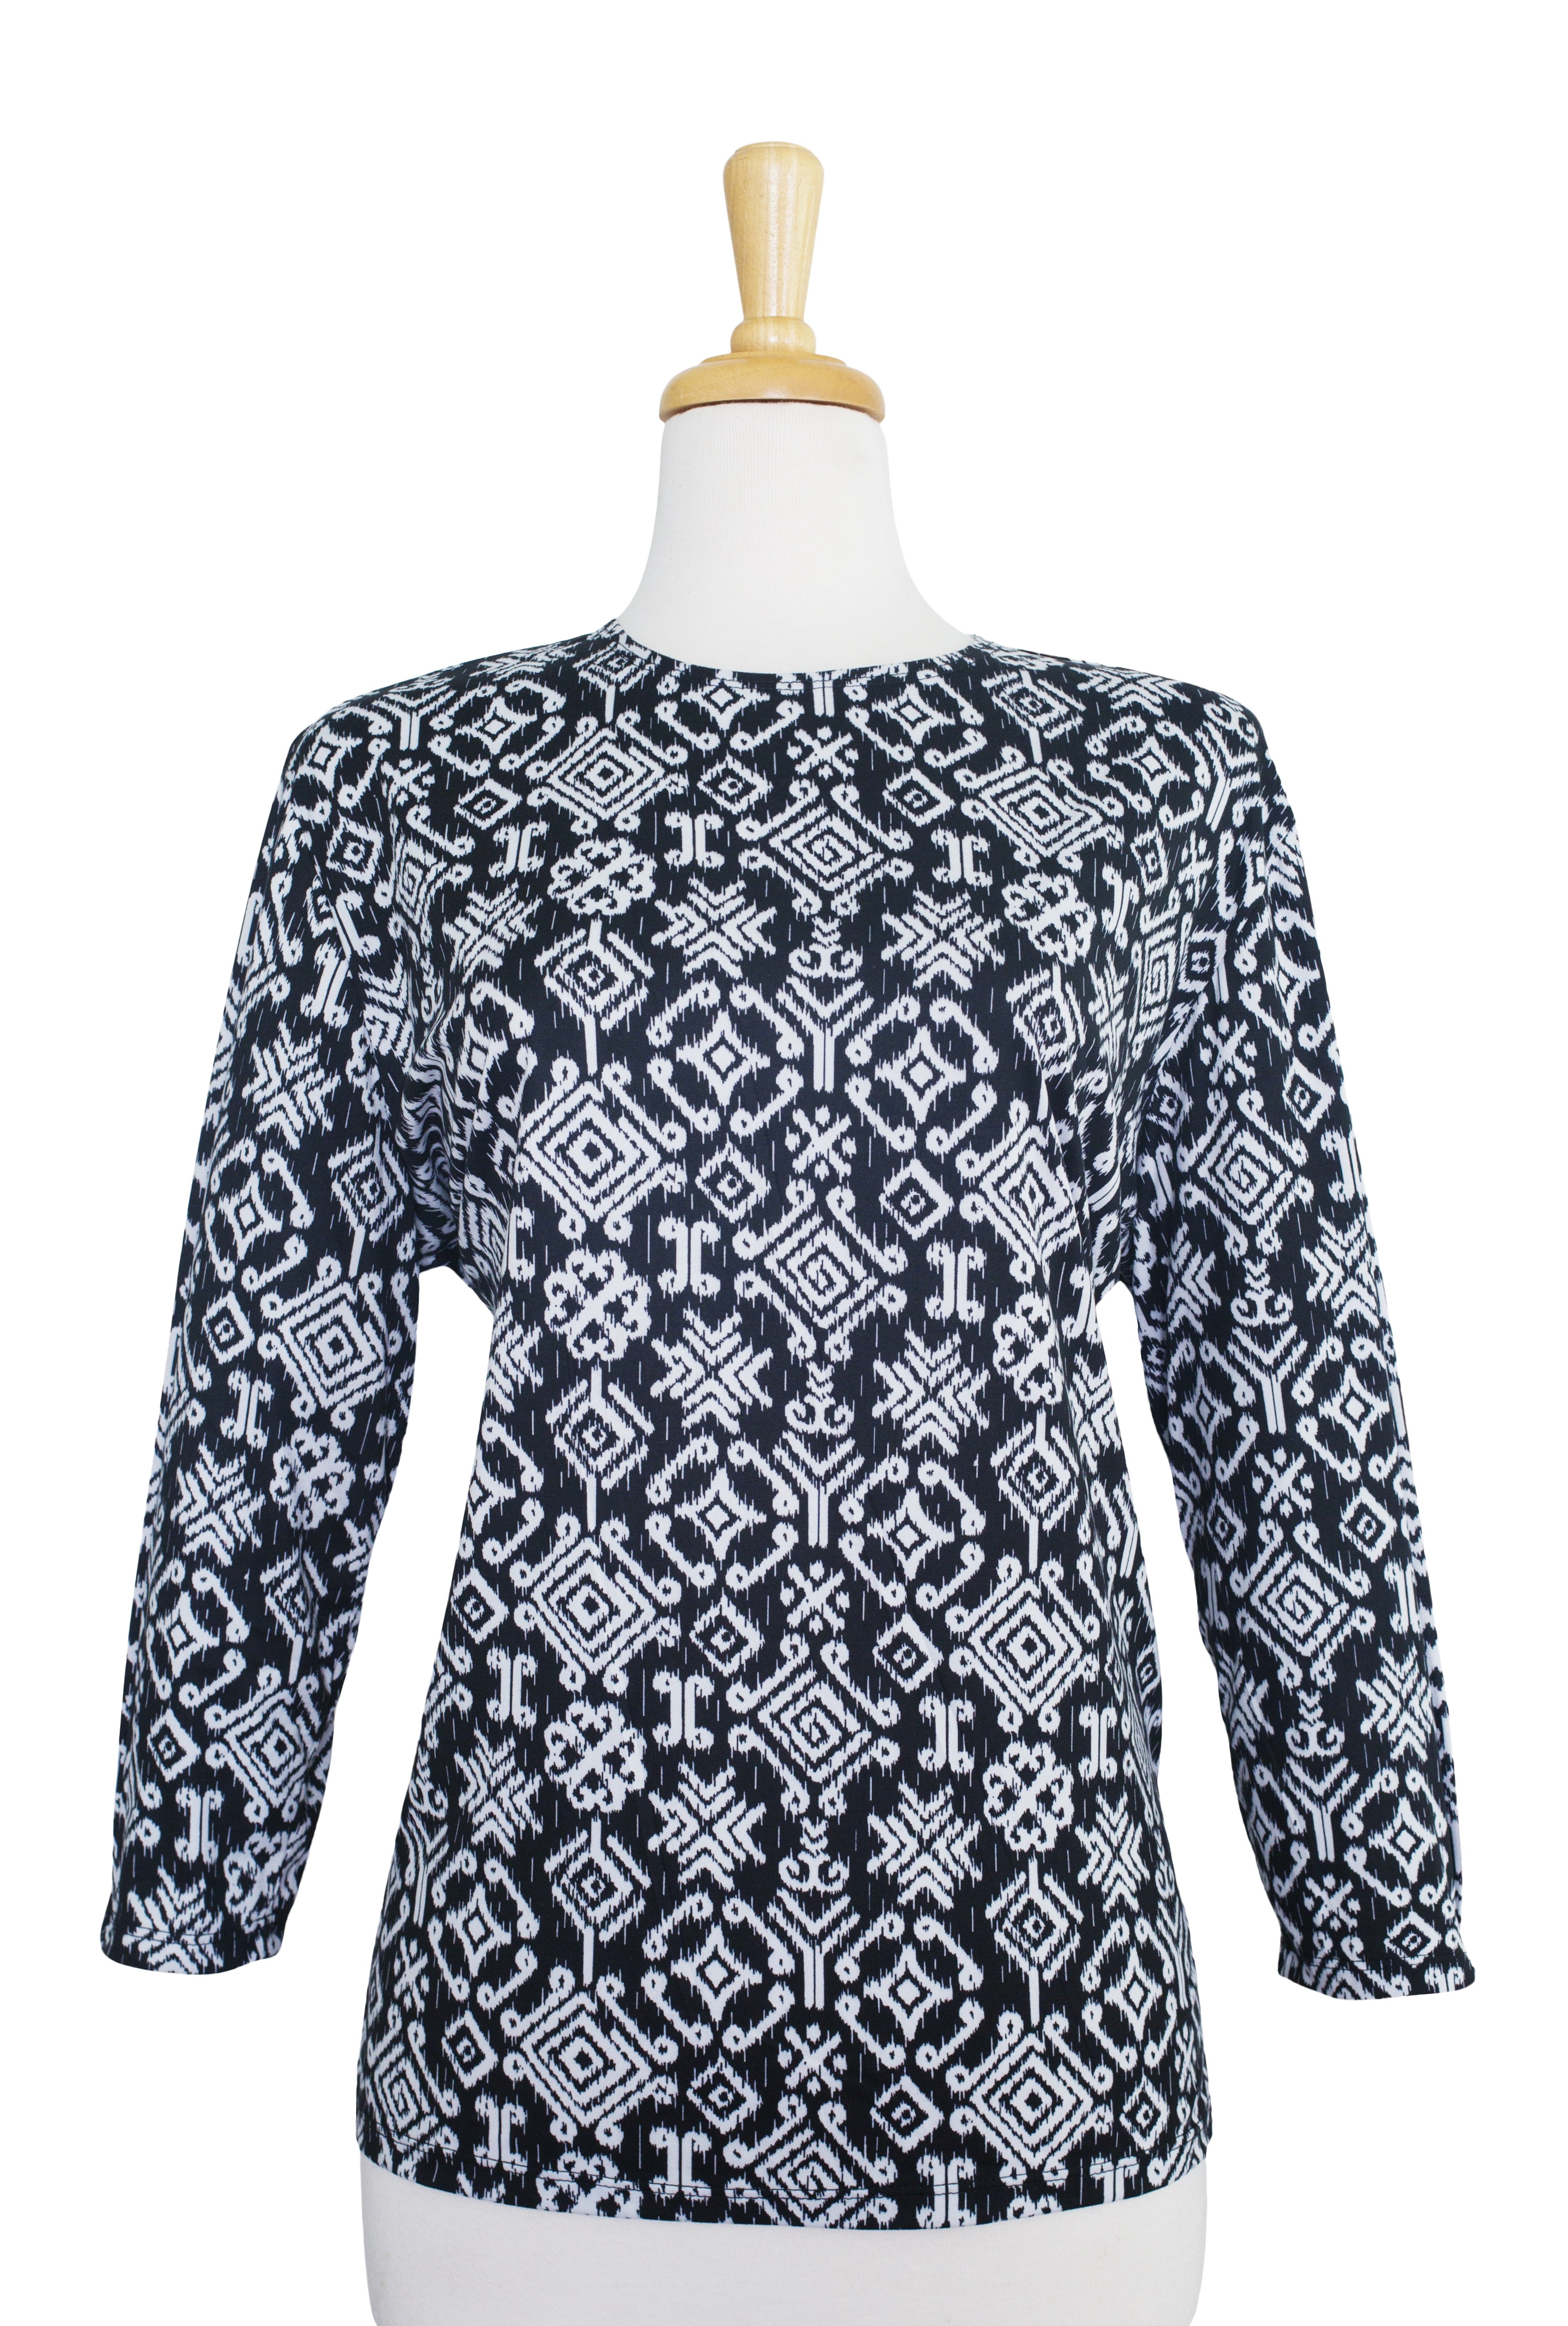 Plus Size Black and White Geometric 3/4 Sleeve  Cotton Top 